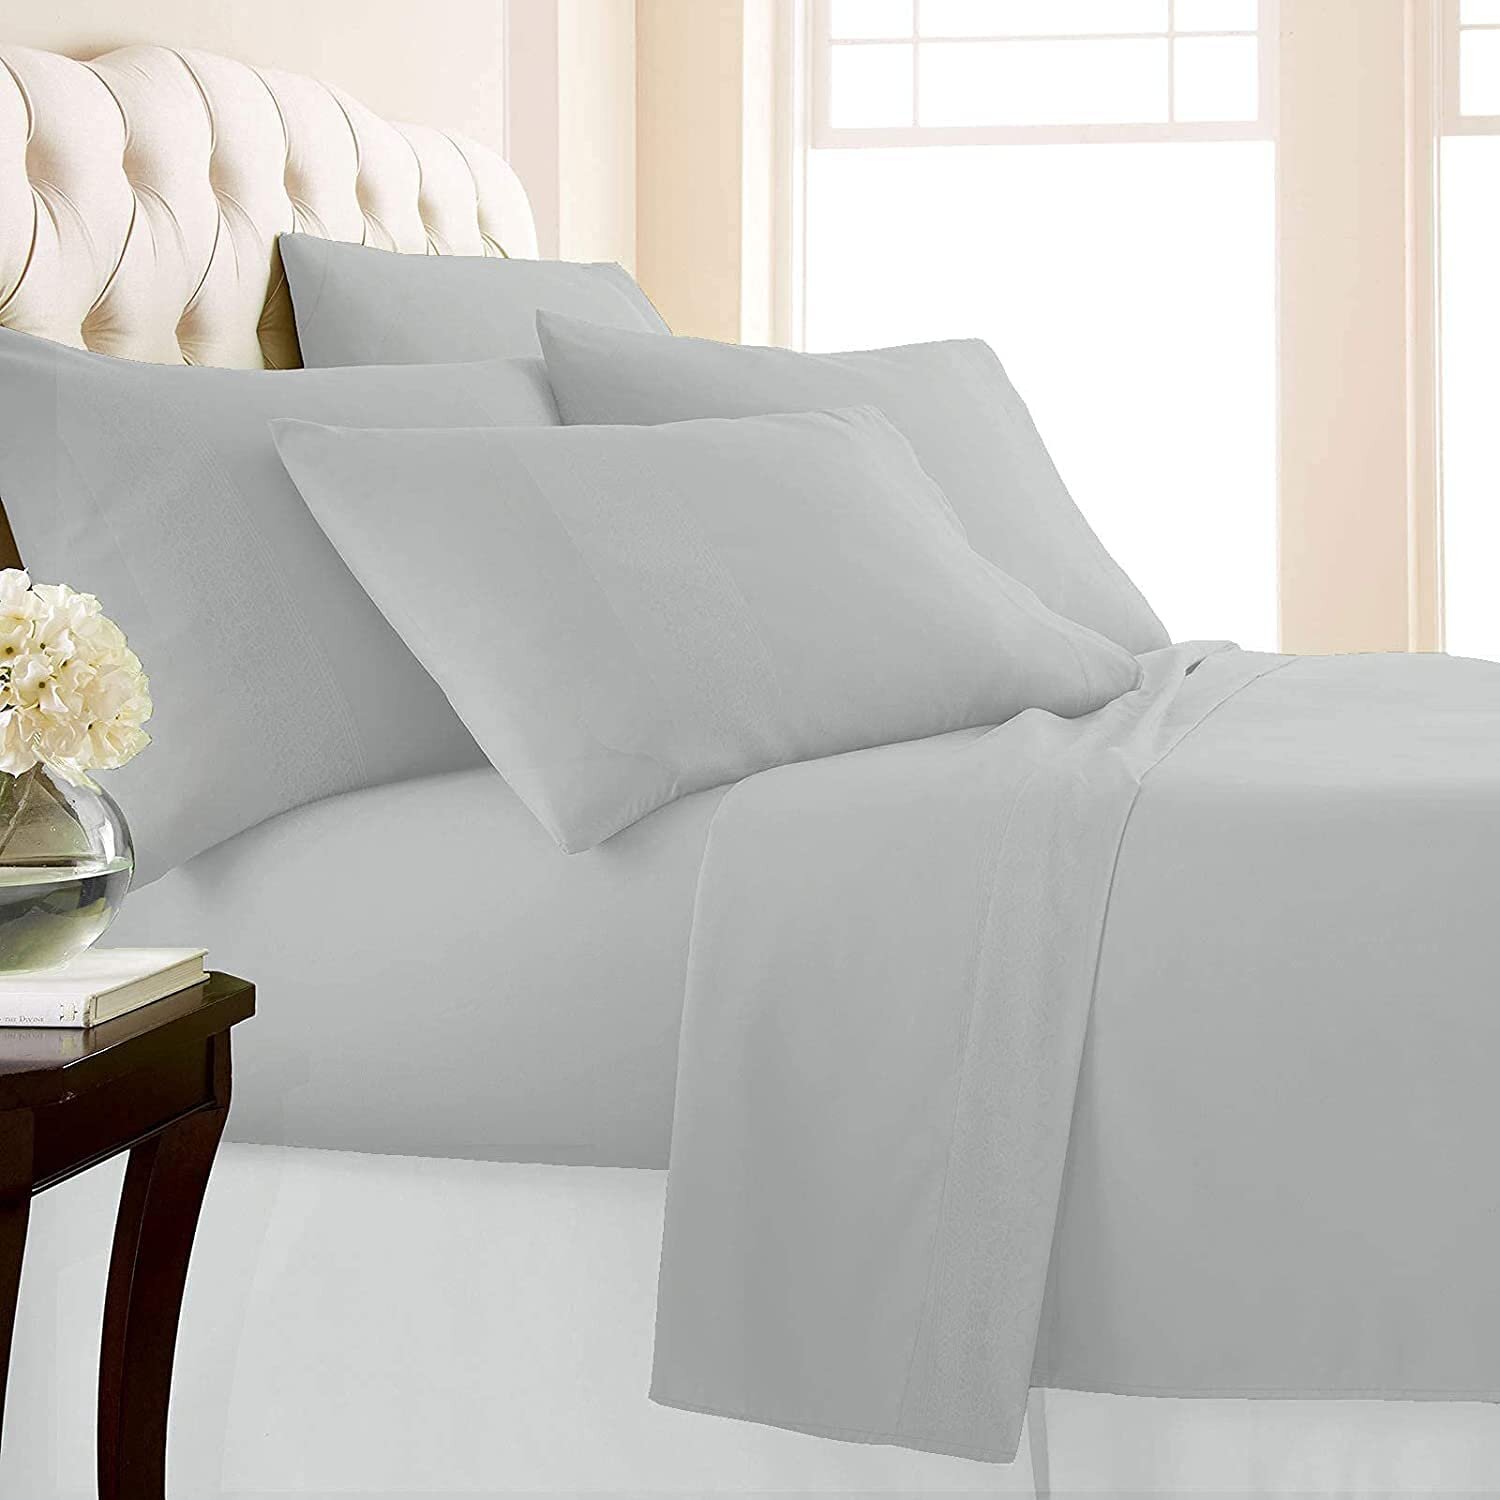 Luxury 1000 Thread Count Solid 100% Long Staple Cotton Sheets Thick Long Lasting 